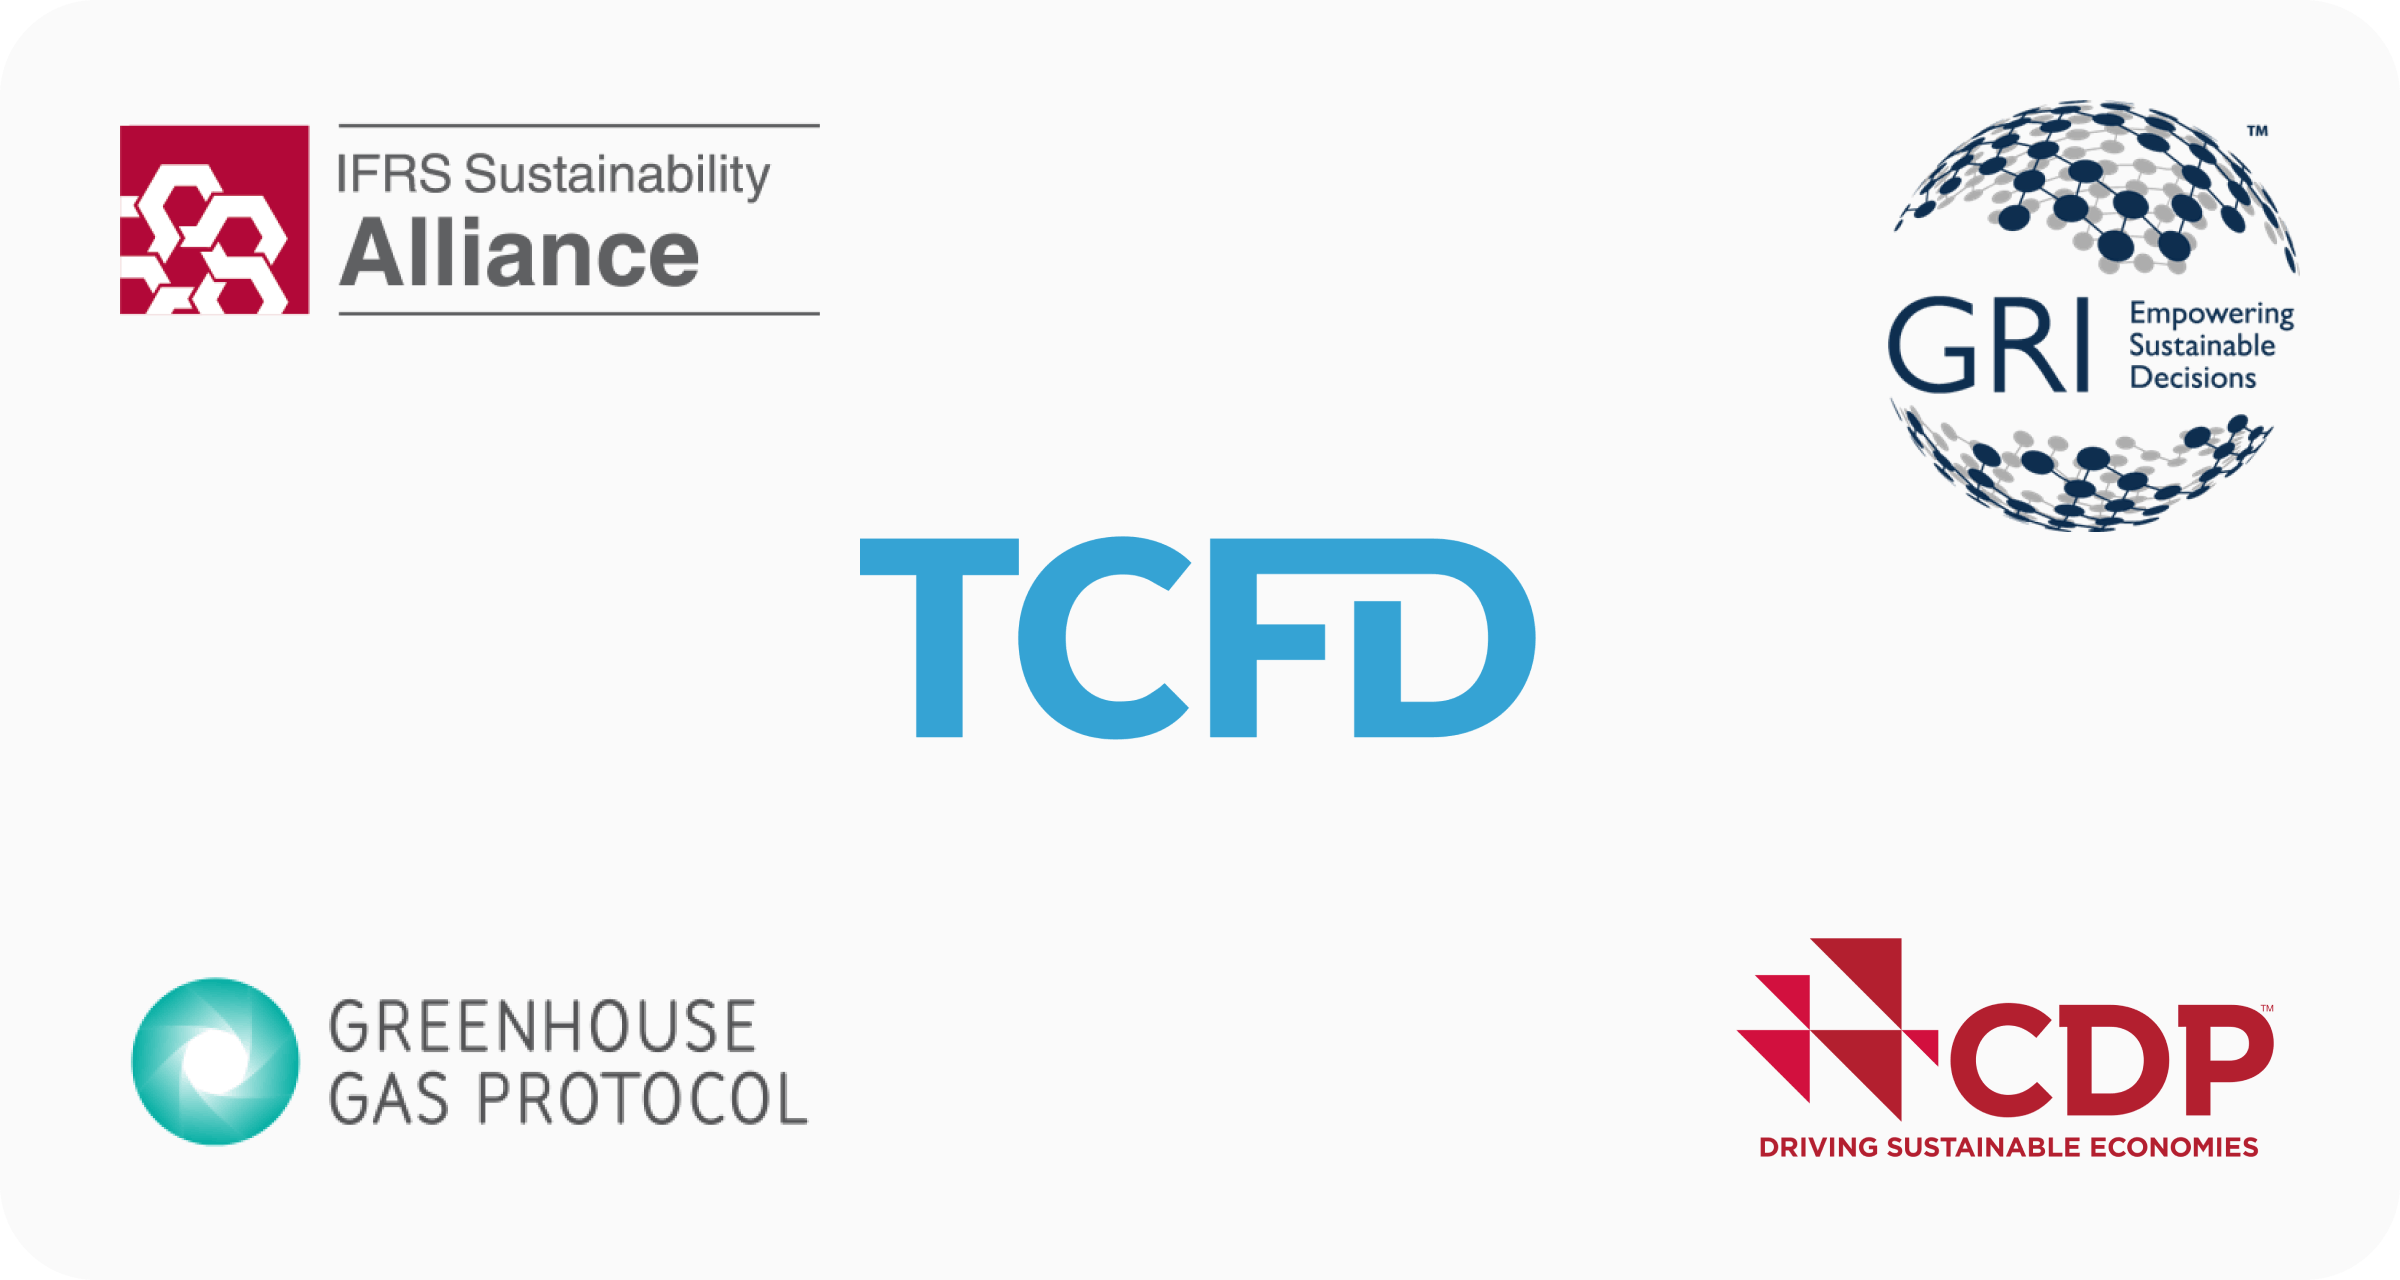 Logos of: the IFRS Sustainability Alliance, GRI, TCFD, CDP, Greenhouse Gas Protocol